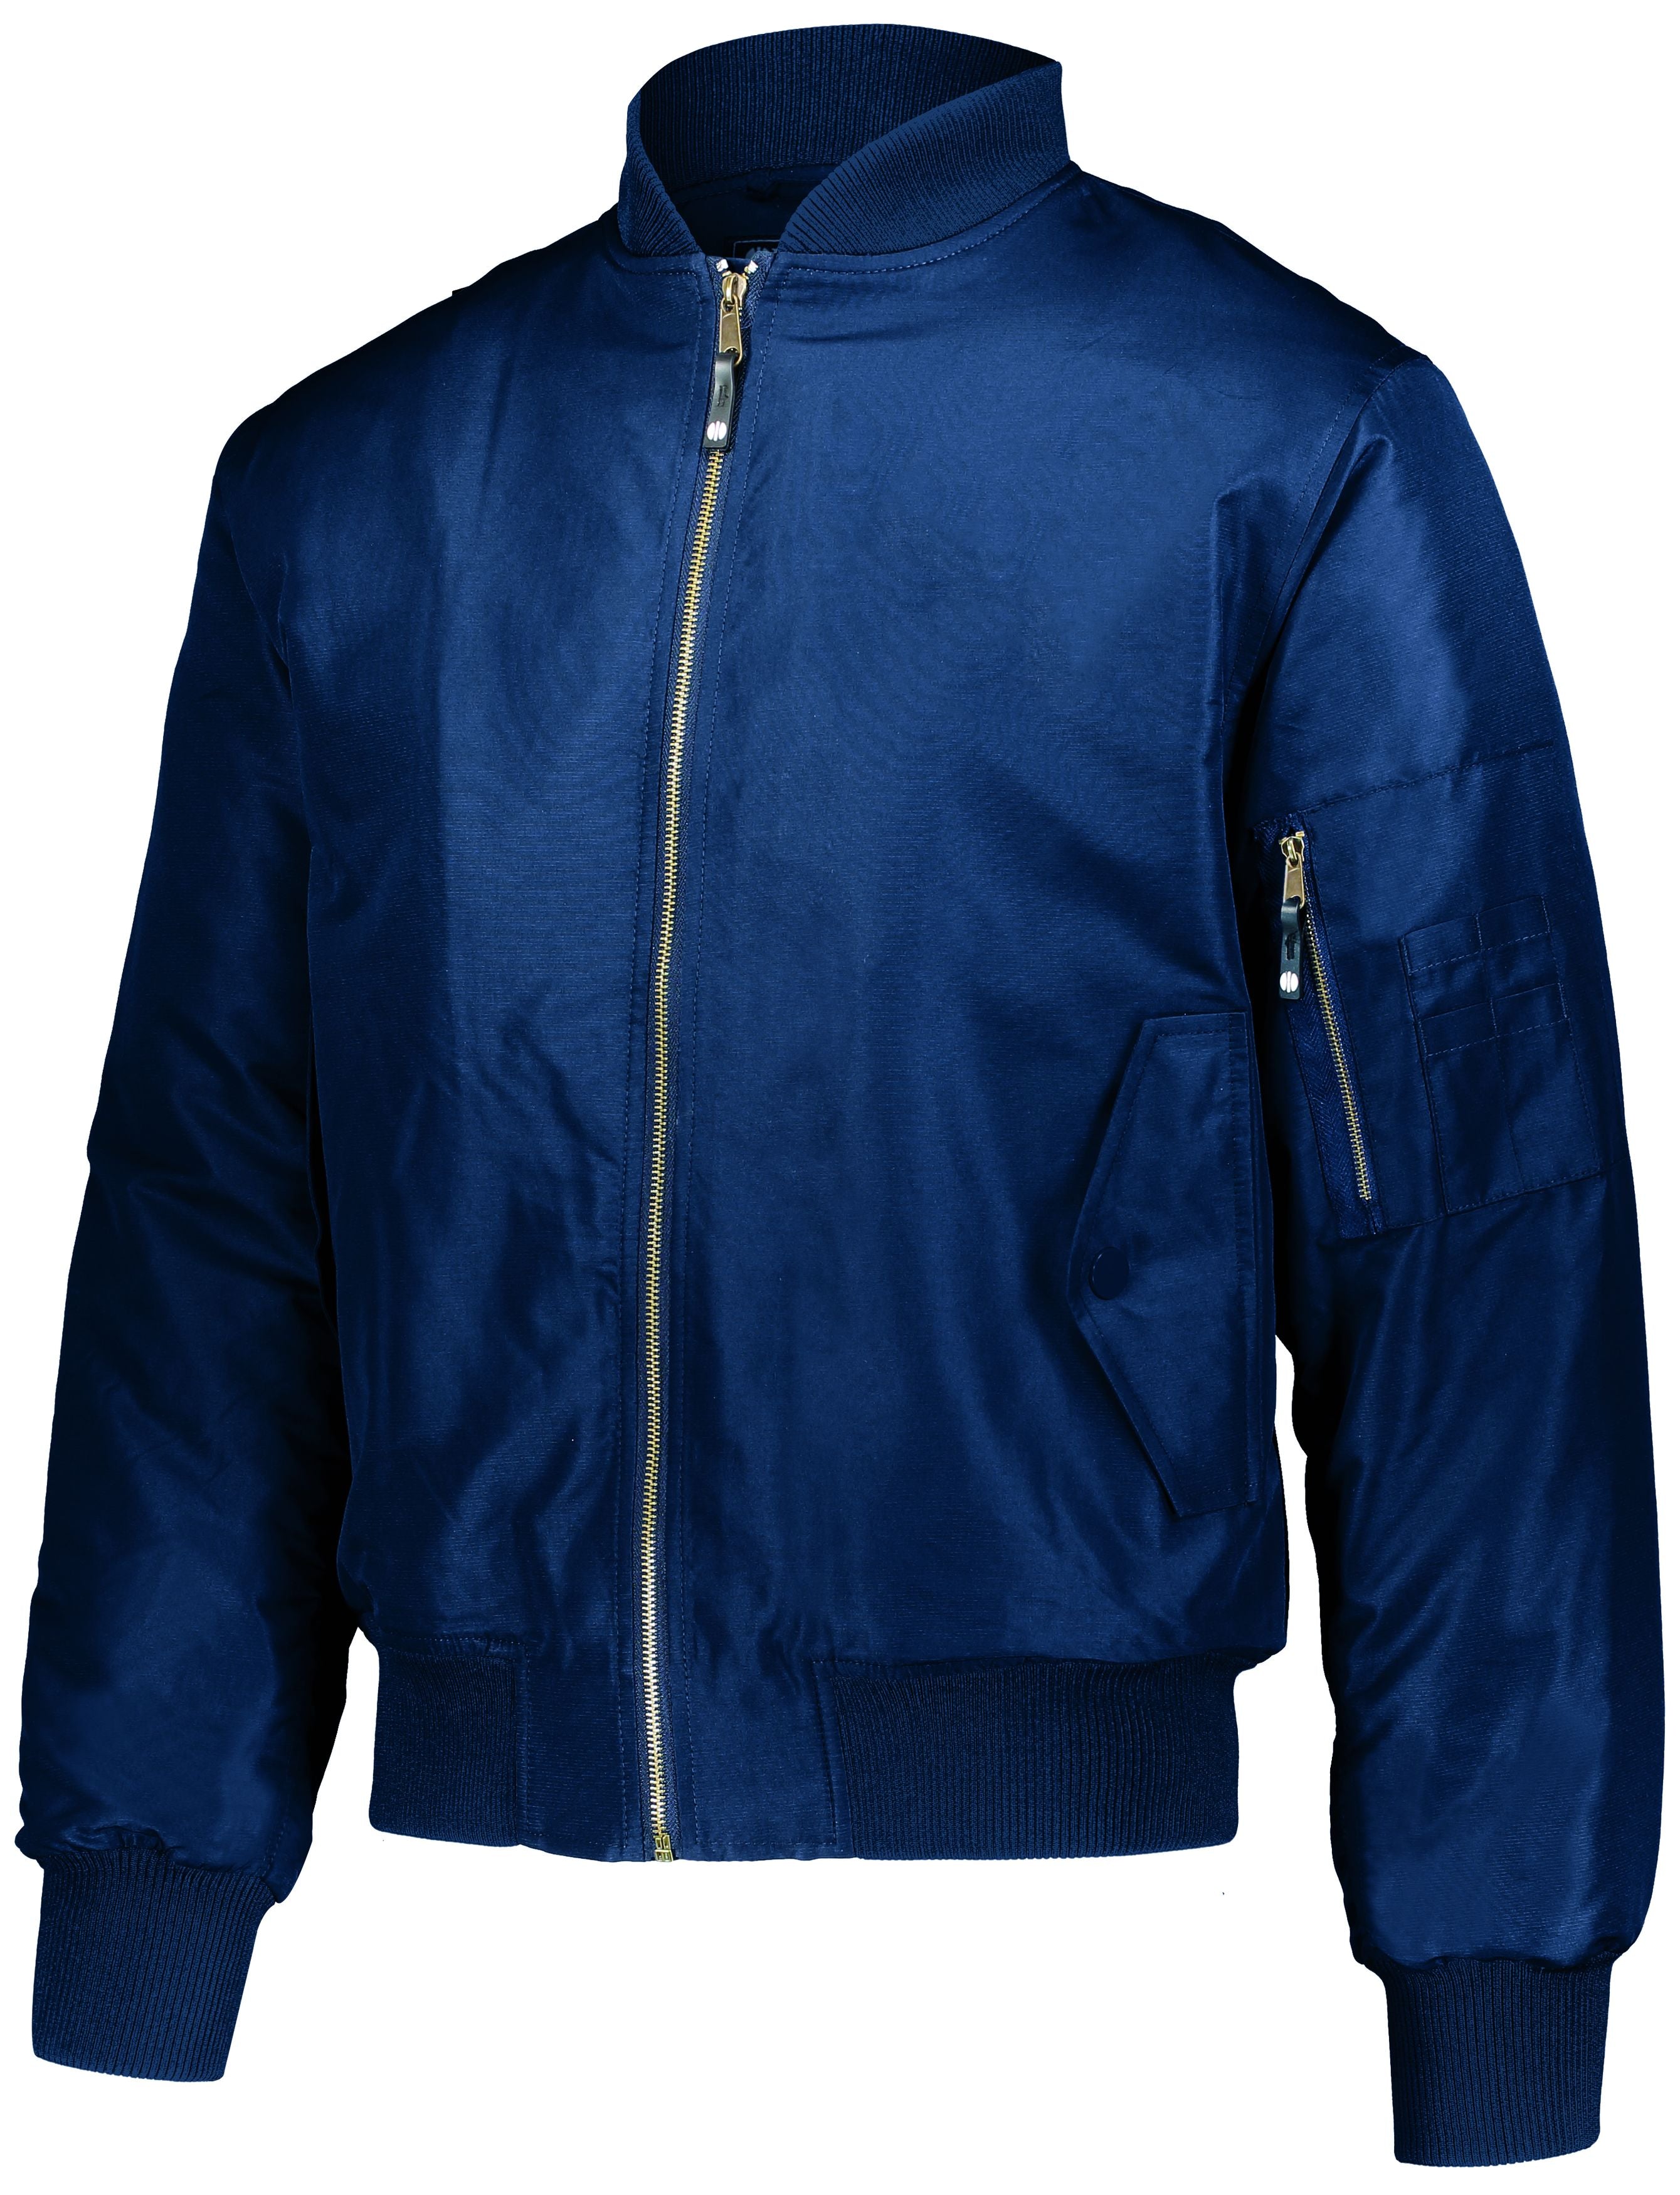 Holloway Flight Bomber Jacket in Navy  -Part of the Adult, Adult-Jacket, Holloway, Outerwear product lines at KanaleyCreations.com